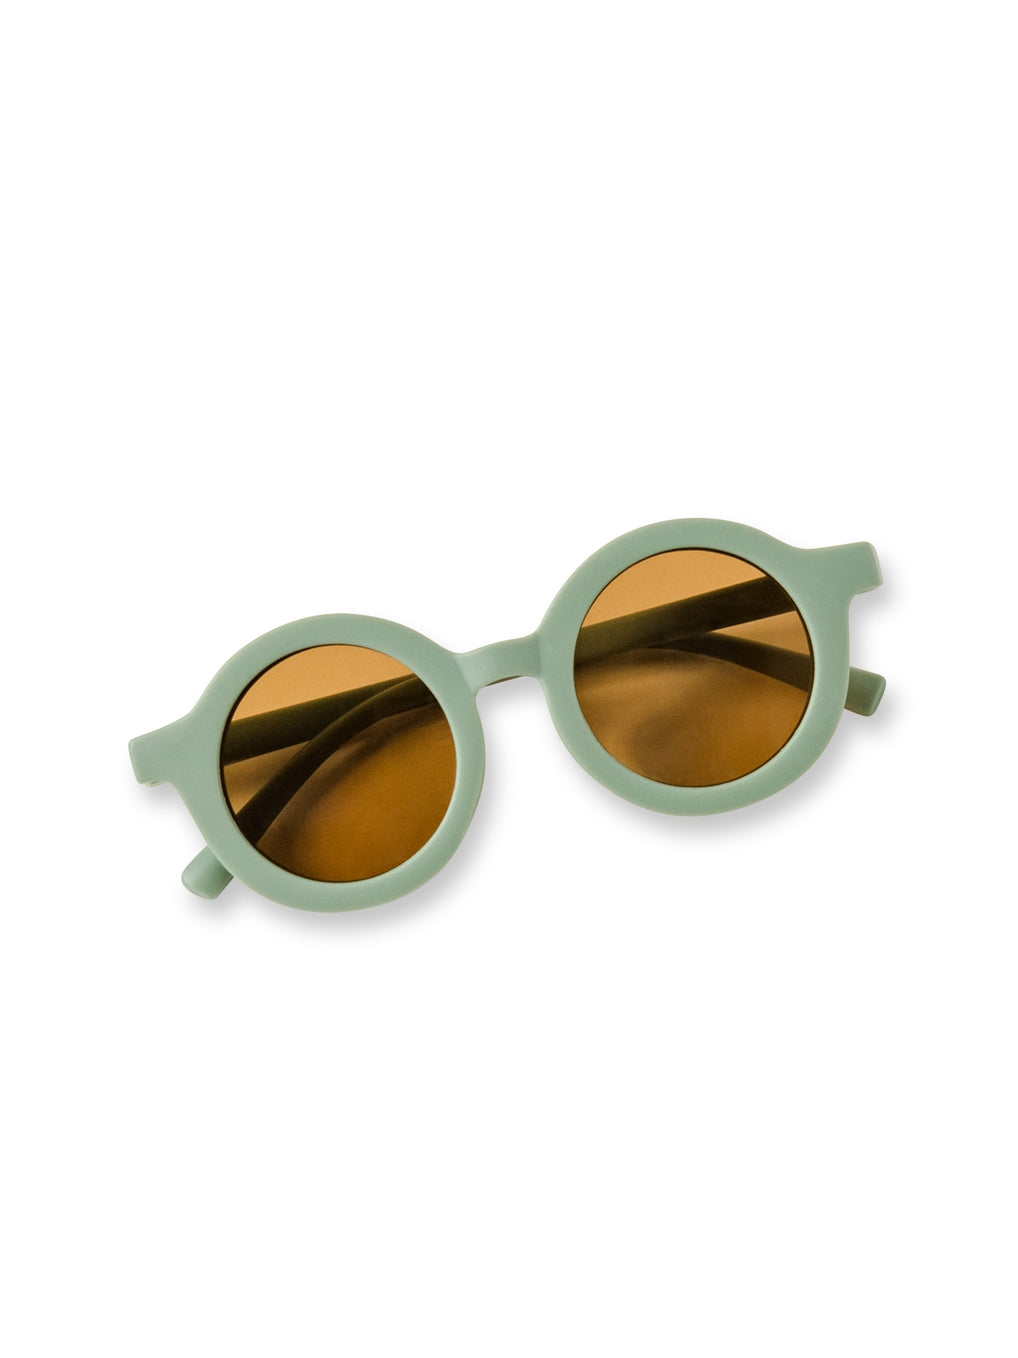 Sunglasses for babies and kids to protect their eyes from harmful UV rays at the beach or park. These adorable sunnies work best for little ones under 10 years old. Made with recycled plastic and UV400 lenses. Available in a variety of colors. 